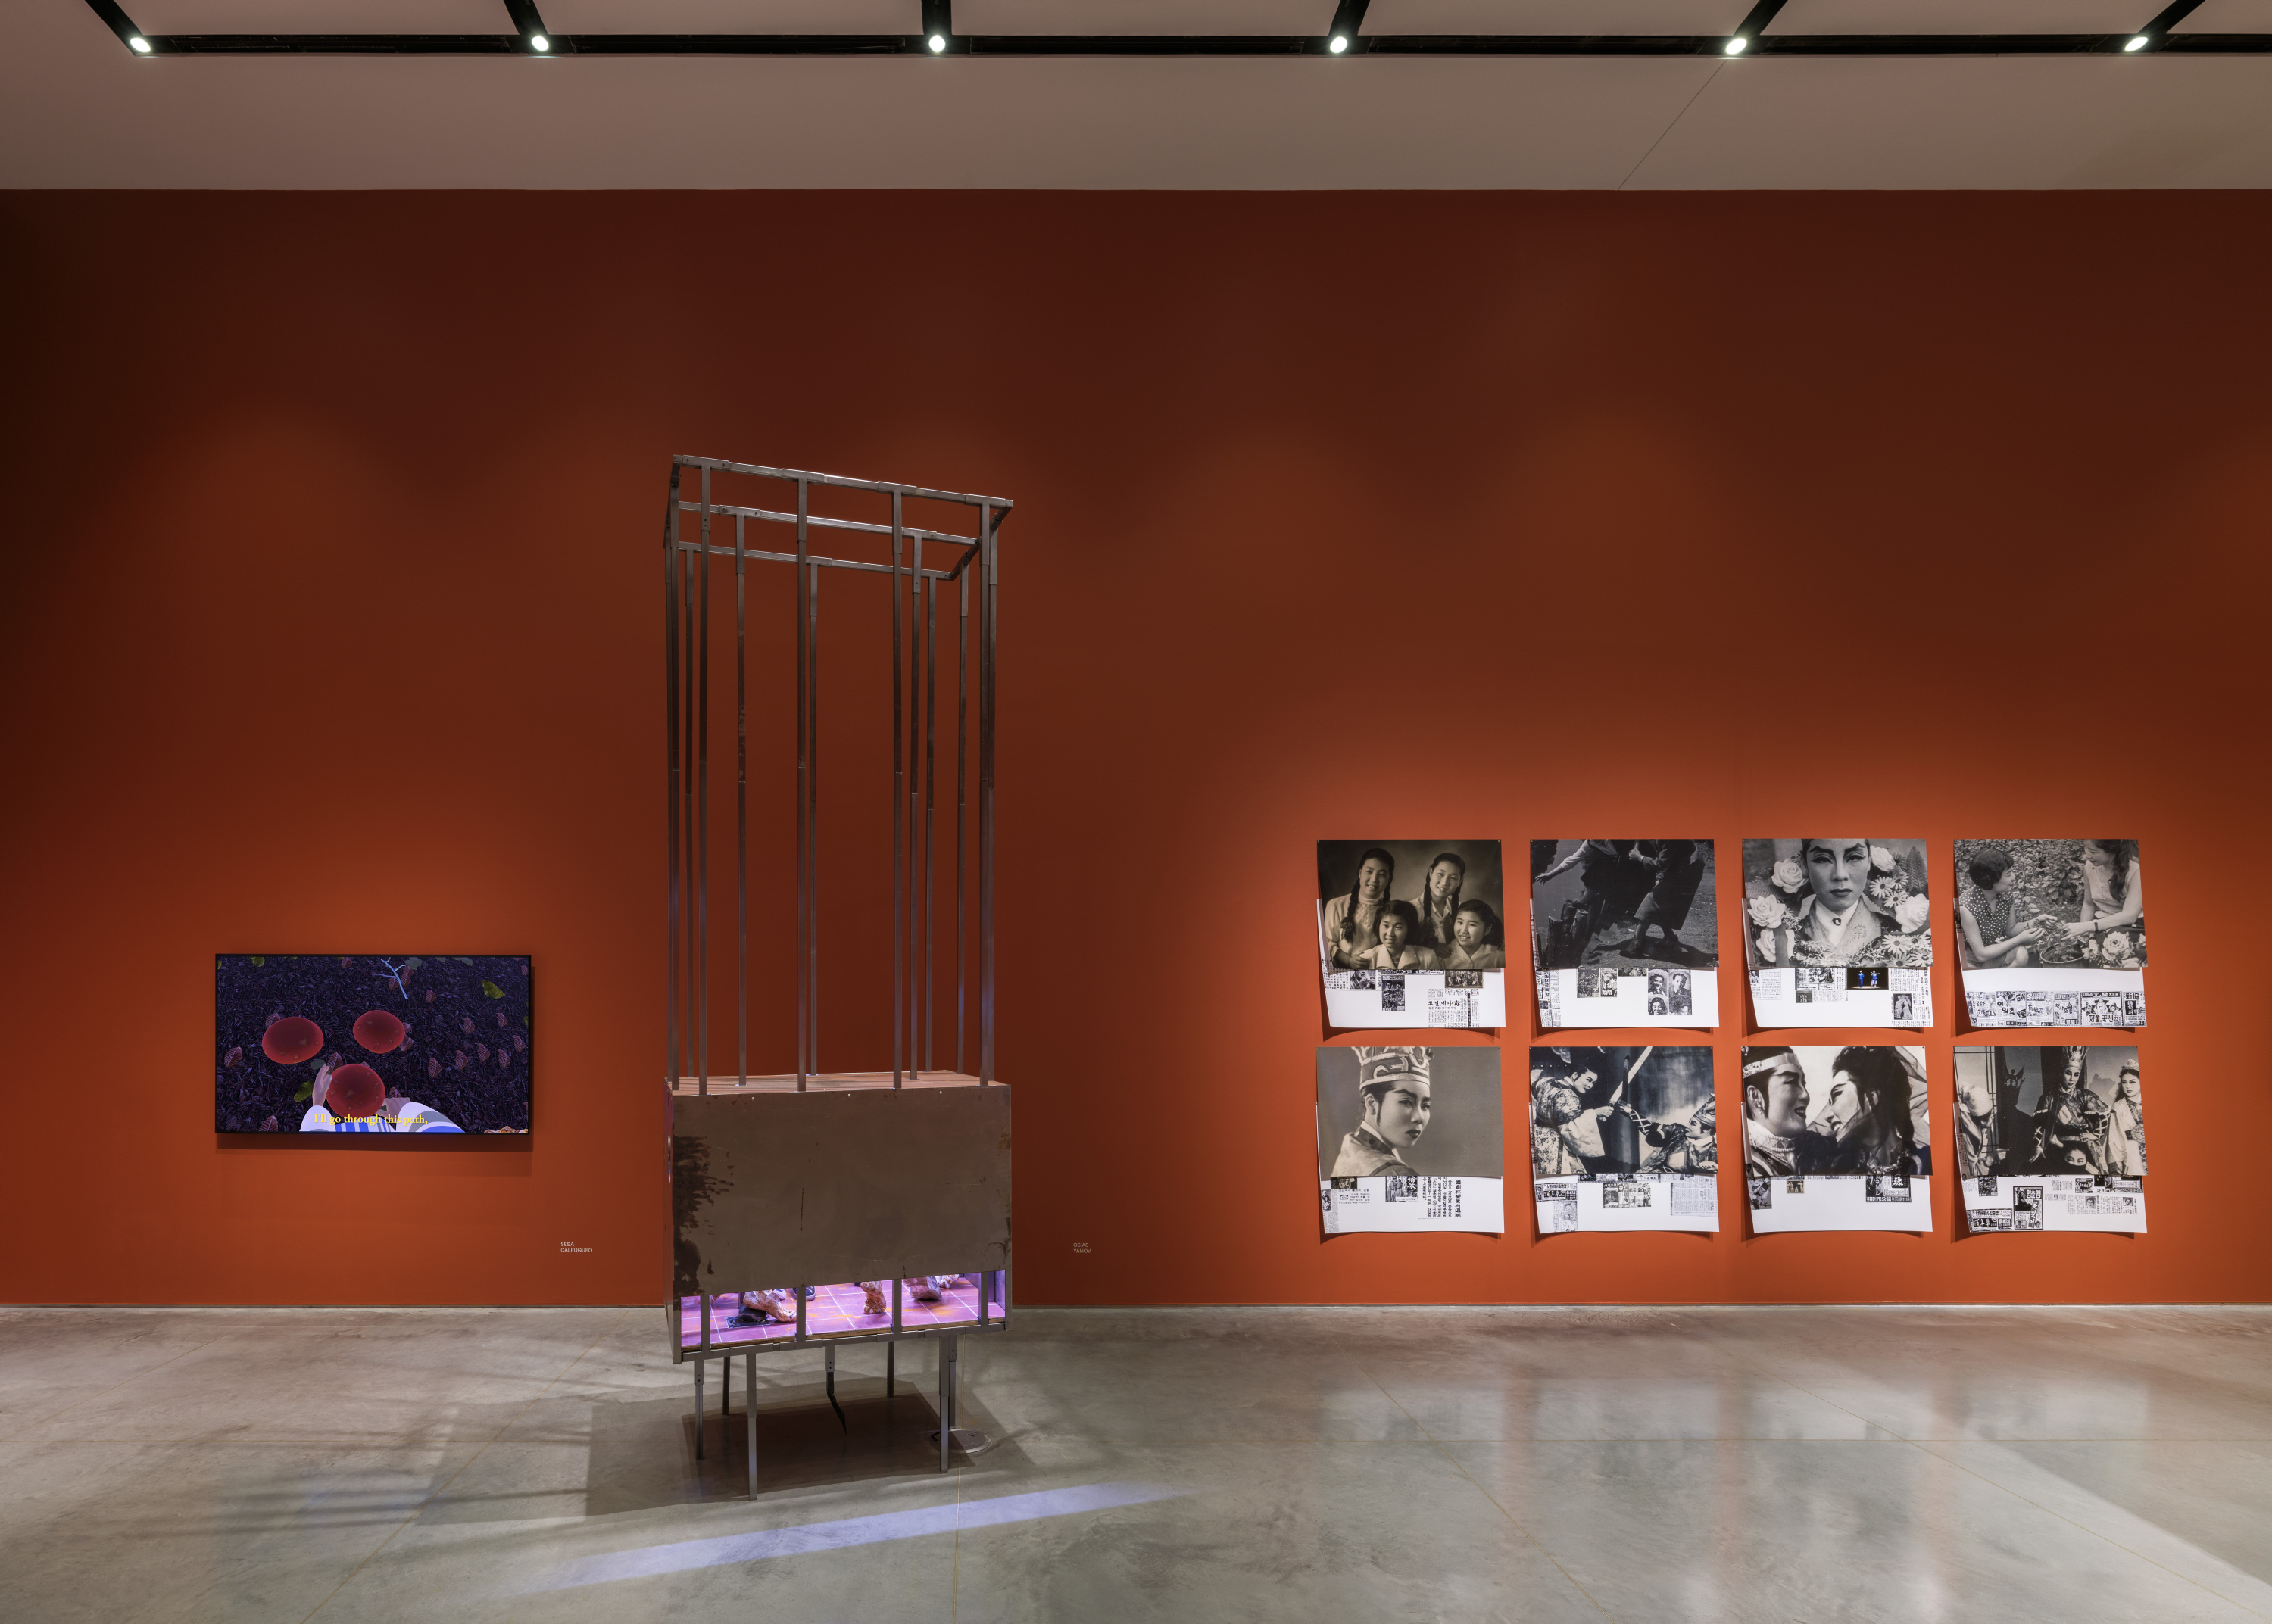 A terracotta-red wall connecting to a gray floor. There are several artworks displayed - from left to right - a tv monitor with a video animation, a ceiling-height cage sculptural installation, and a 2-row and 4-column photo collage featuring historical photographs of East Asian stage performers.